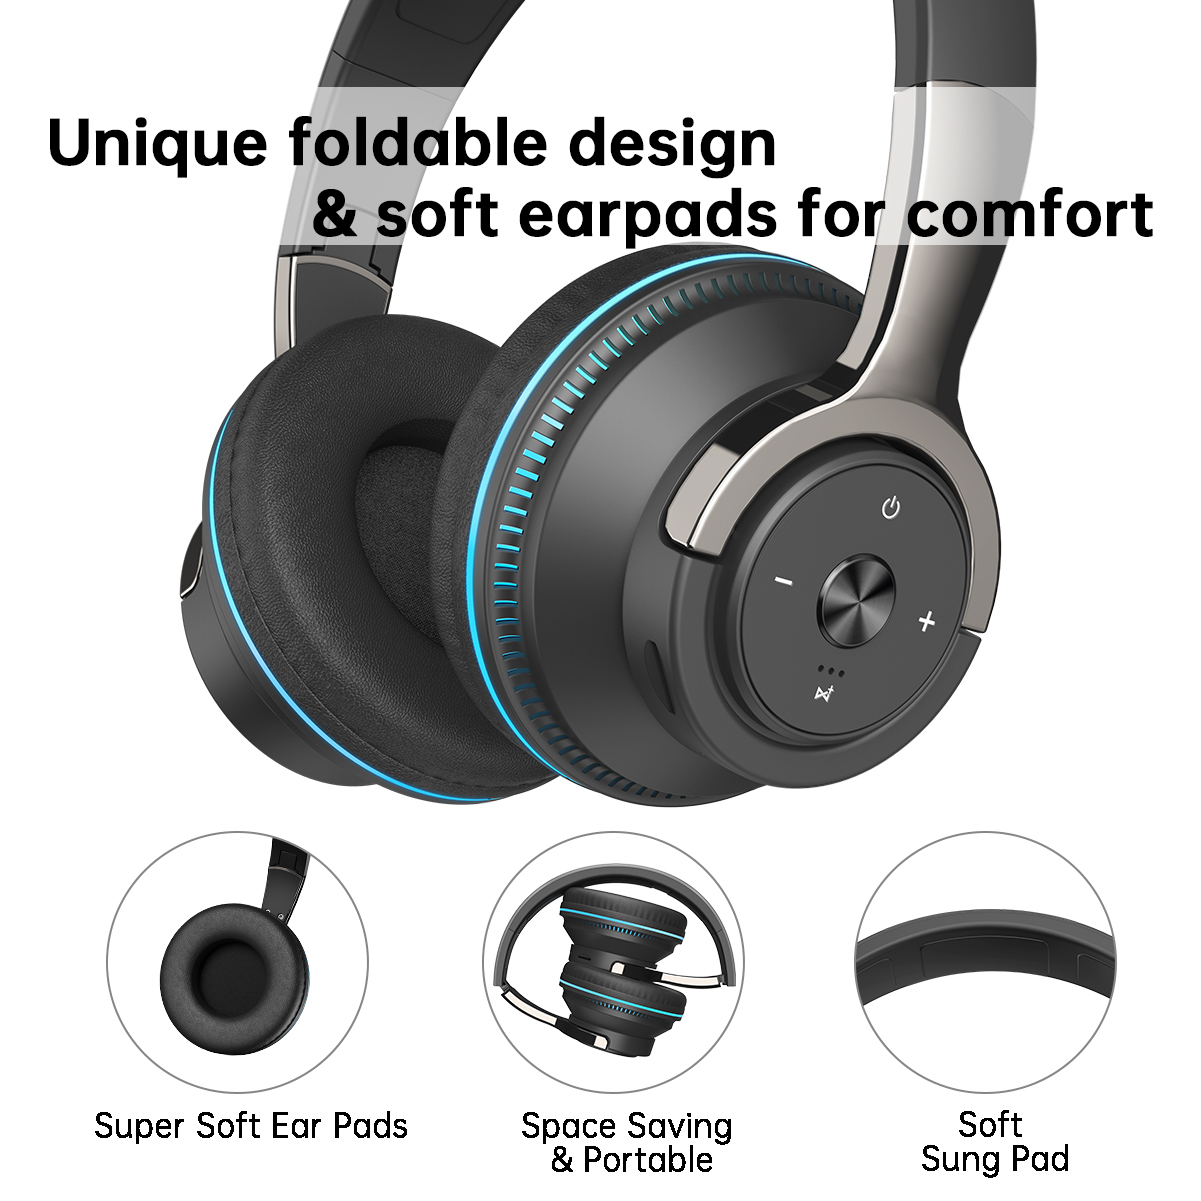 Wireless On-Ear Headphone, Upgrade Bass HiFi Stereo Wireless Heaset, Foldable & Wireless Wired Mode, Noise Isolating Over Ear Headphone w/ Microphone and Volume Control, for Computer Laptop Cell Phone - image 2 of 7